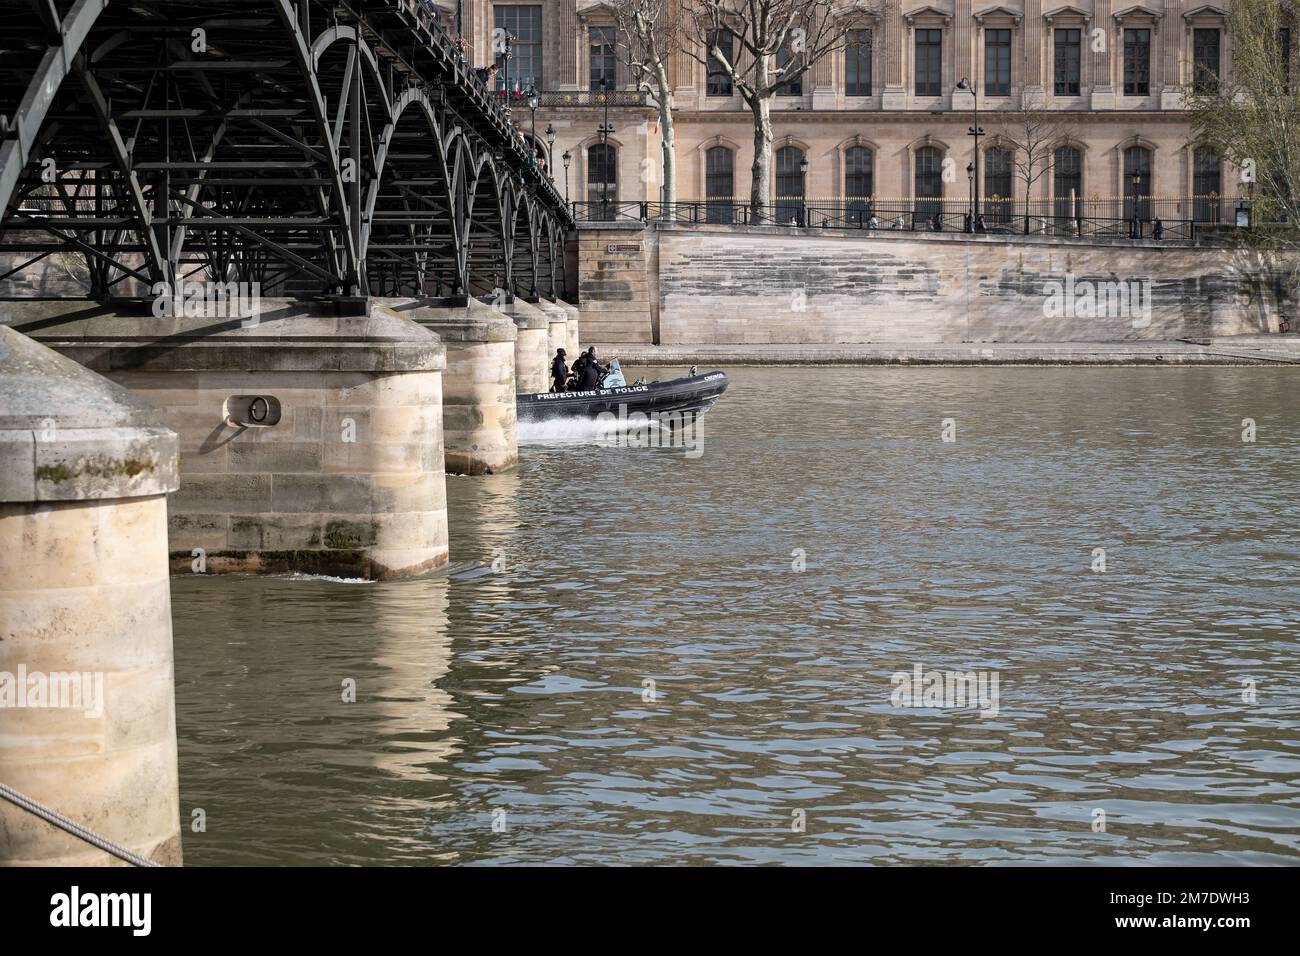 The River Seine in Paris and the river police passing by, the Pont des Arts, the Louvre in the background Stock Photo